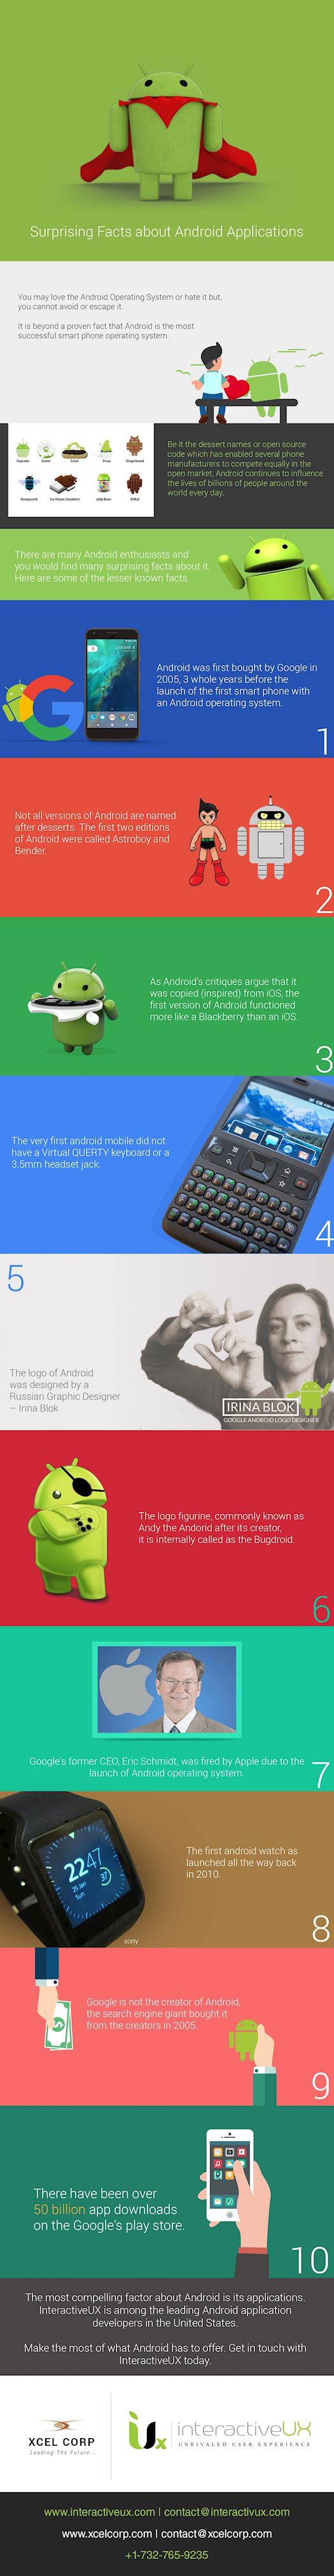 Surprising Facts about Android Applications